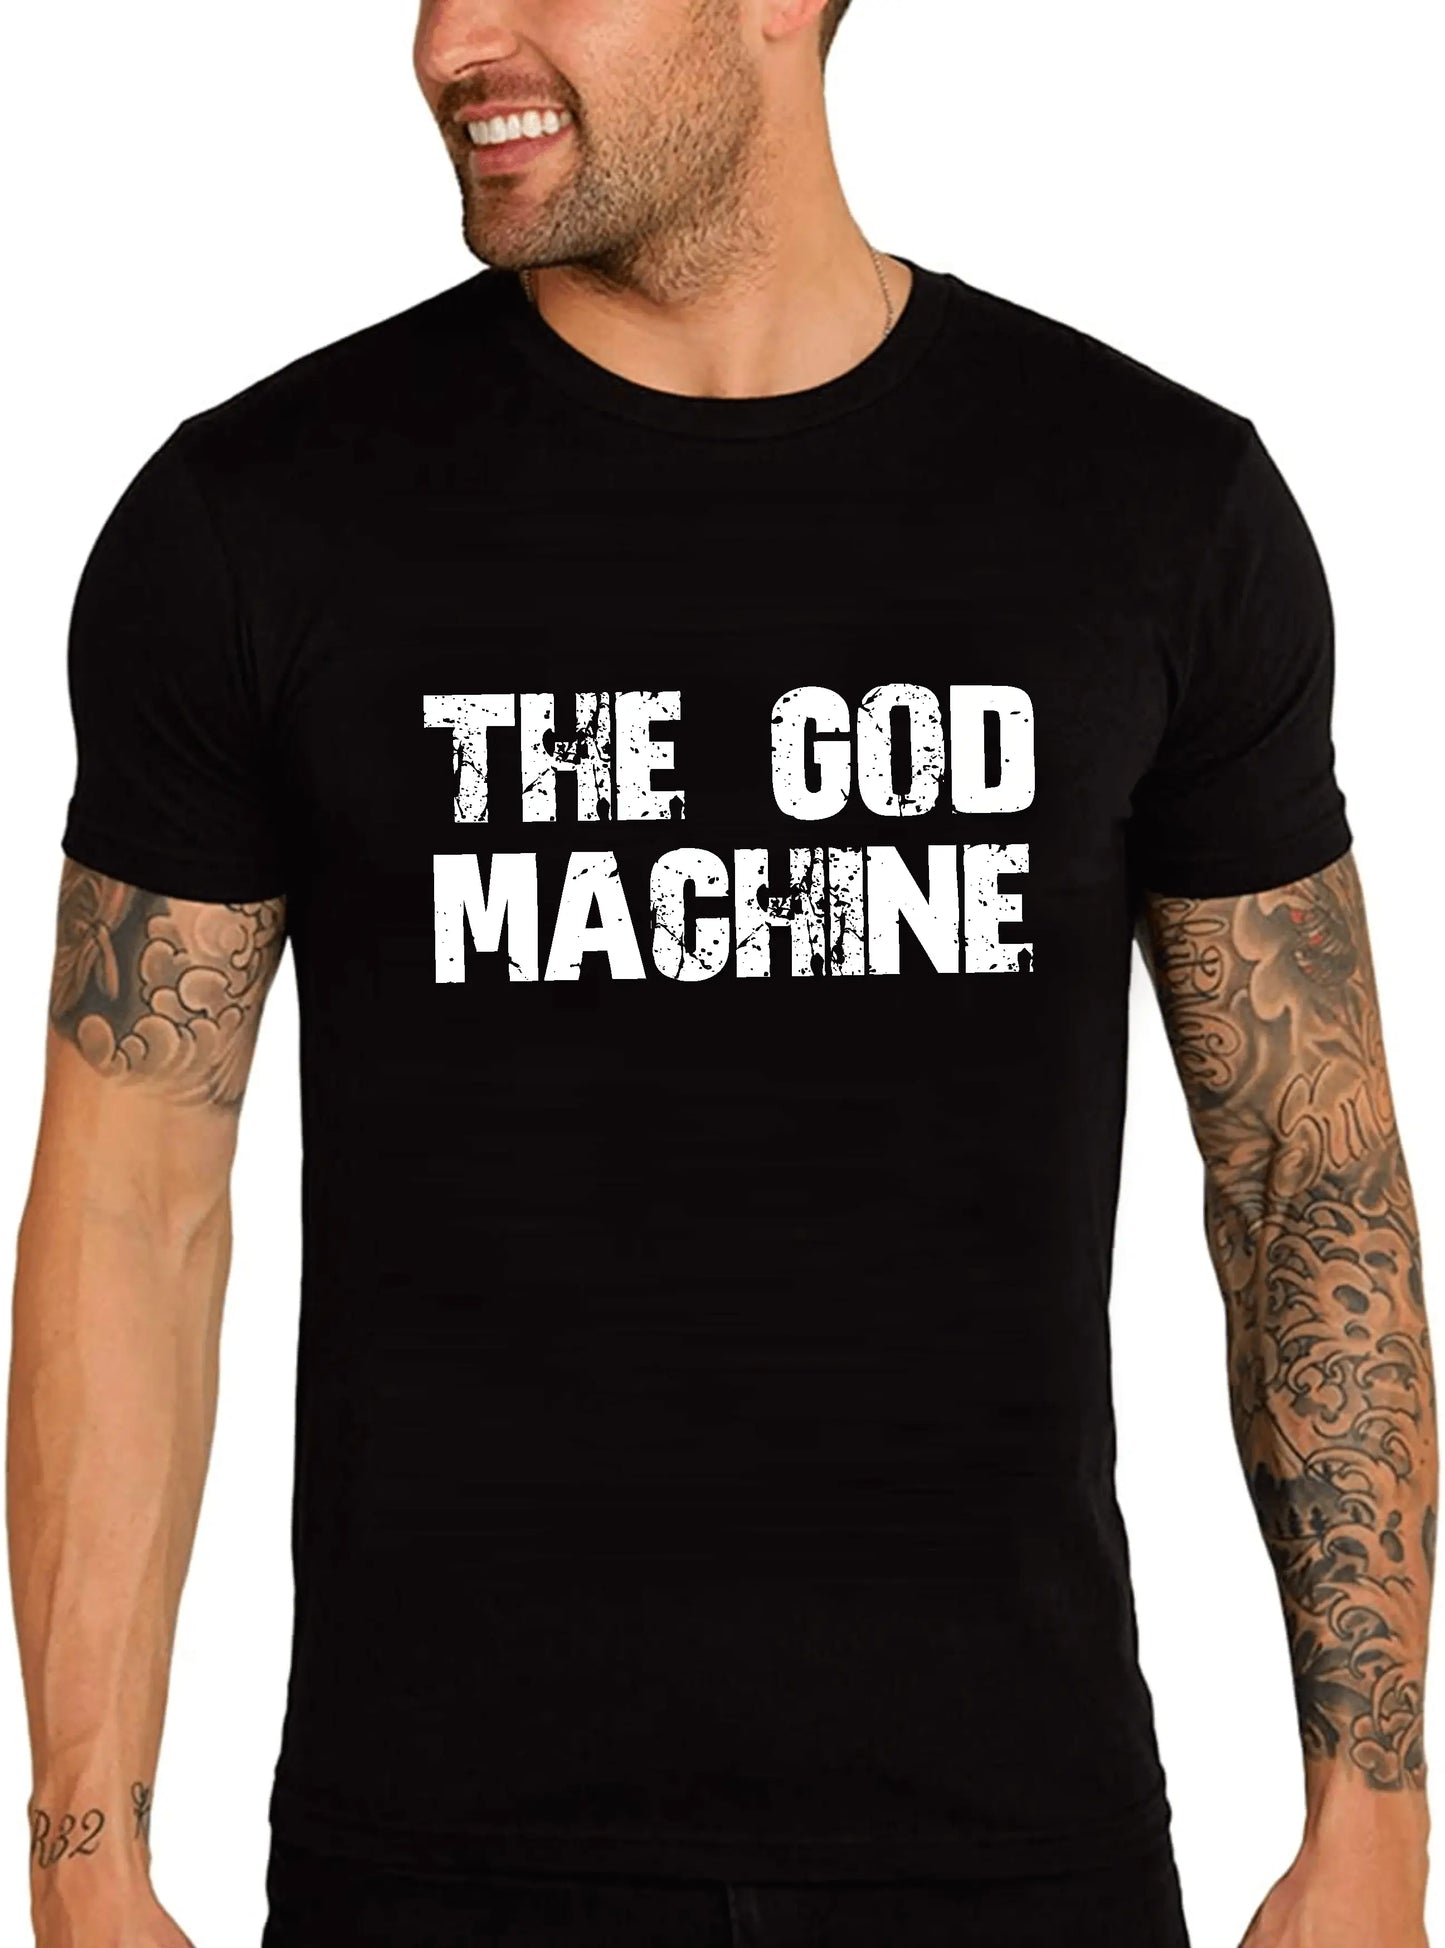 Men's Graphic T-Shirt The God Machine Eco-Friendly Limited Edition Short Sleeve Tee-Shirt Vintage Birthday Gift Novelty